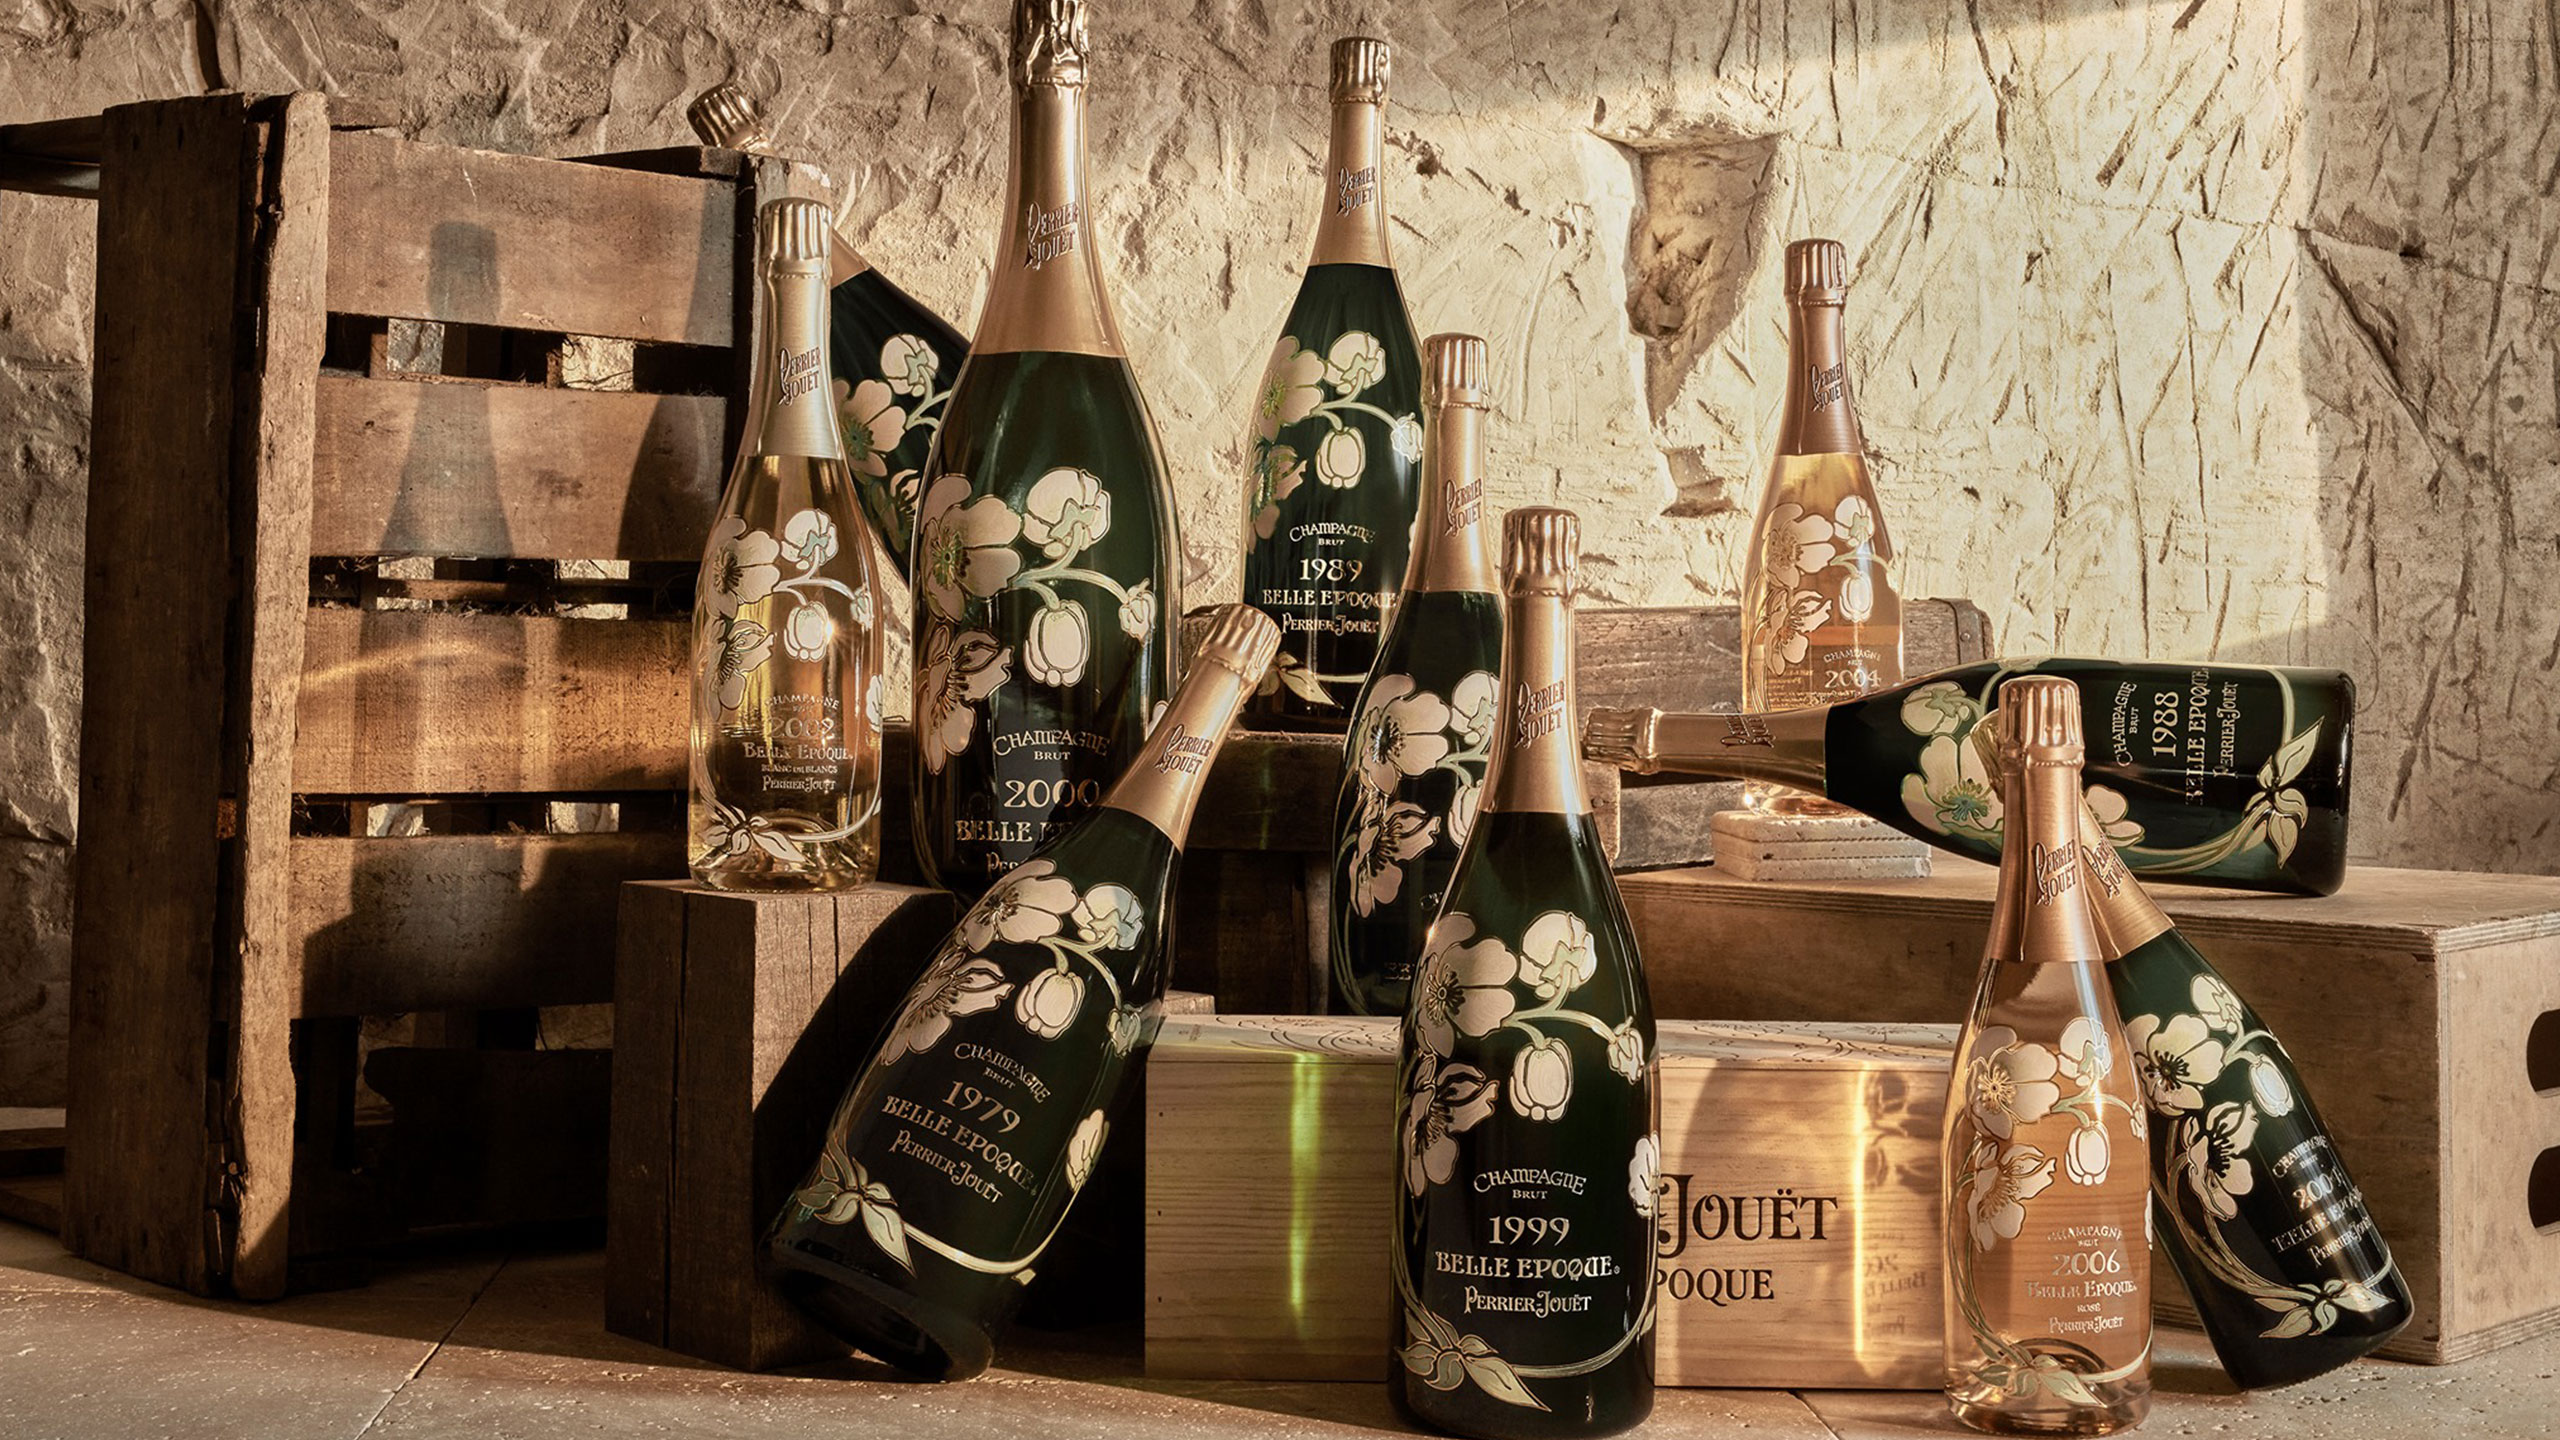 Perrier-Jouet-champagne